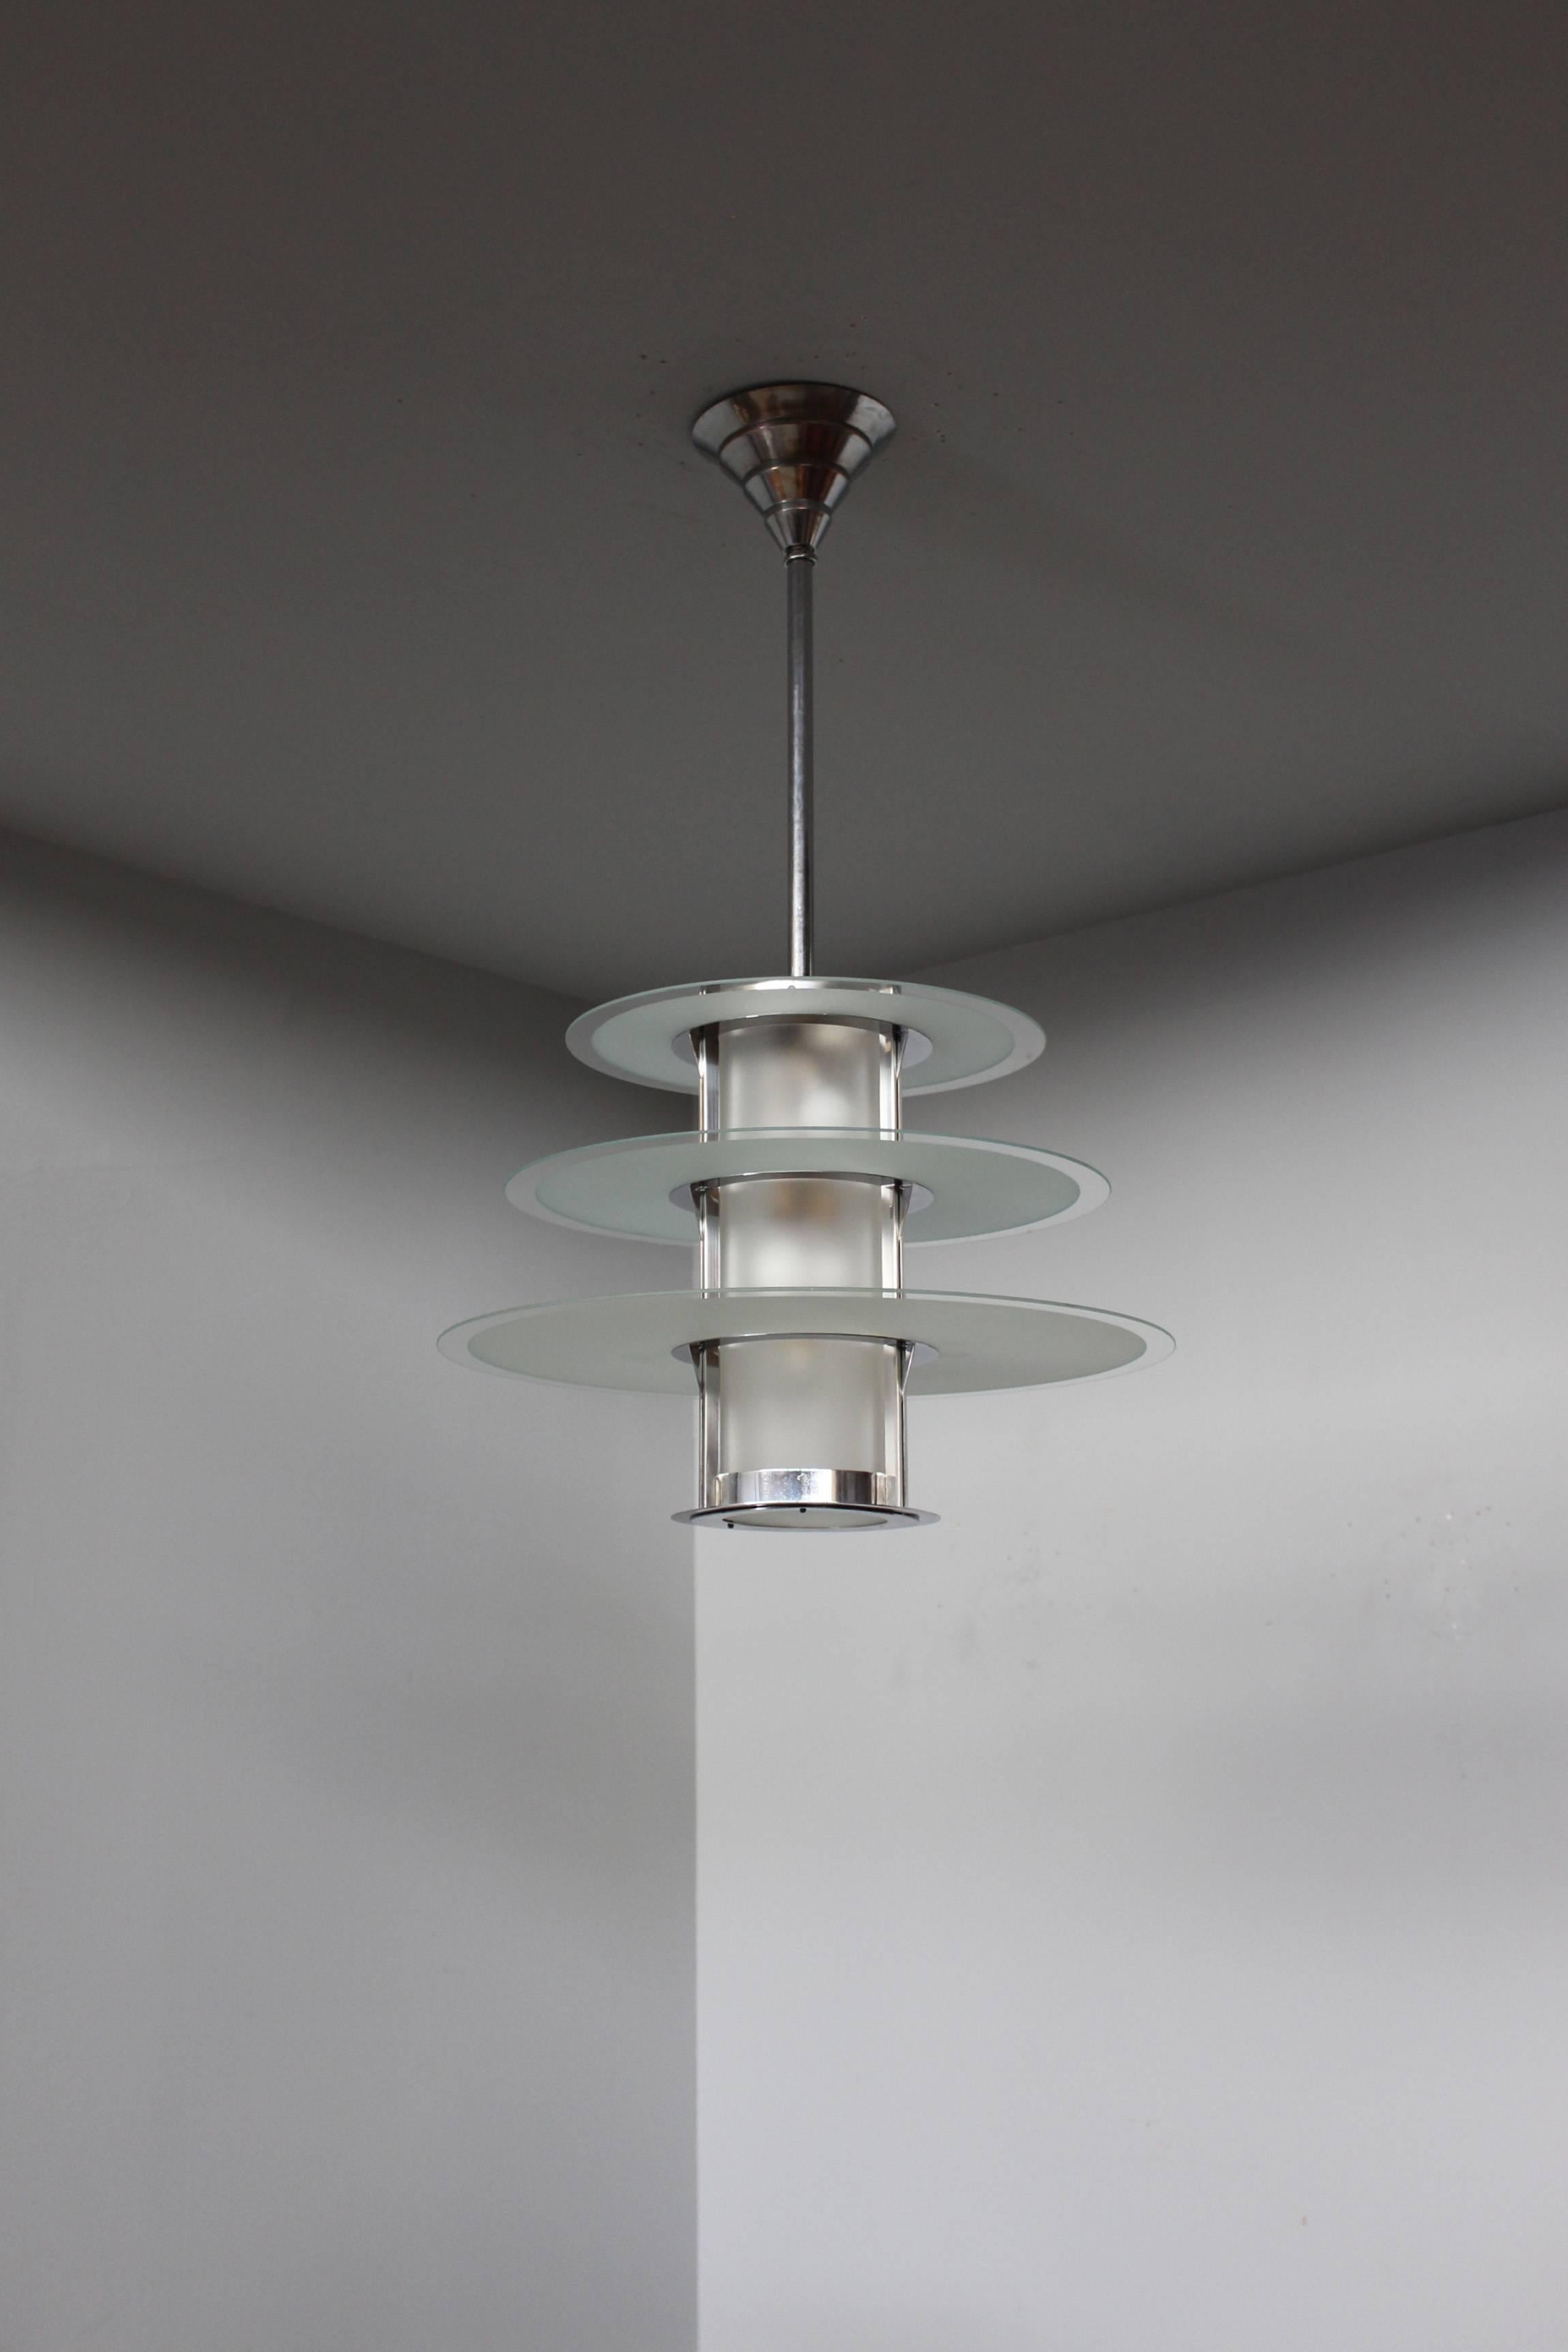 A Fine French 1930's Chrome and Glass Modernist Chandelier by Genet et Michon 3